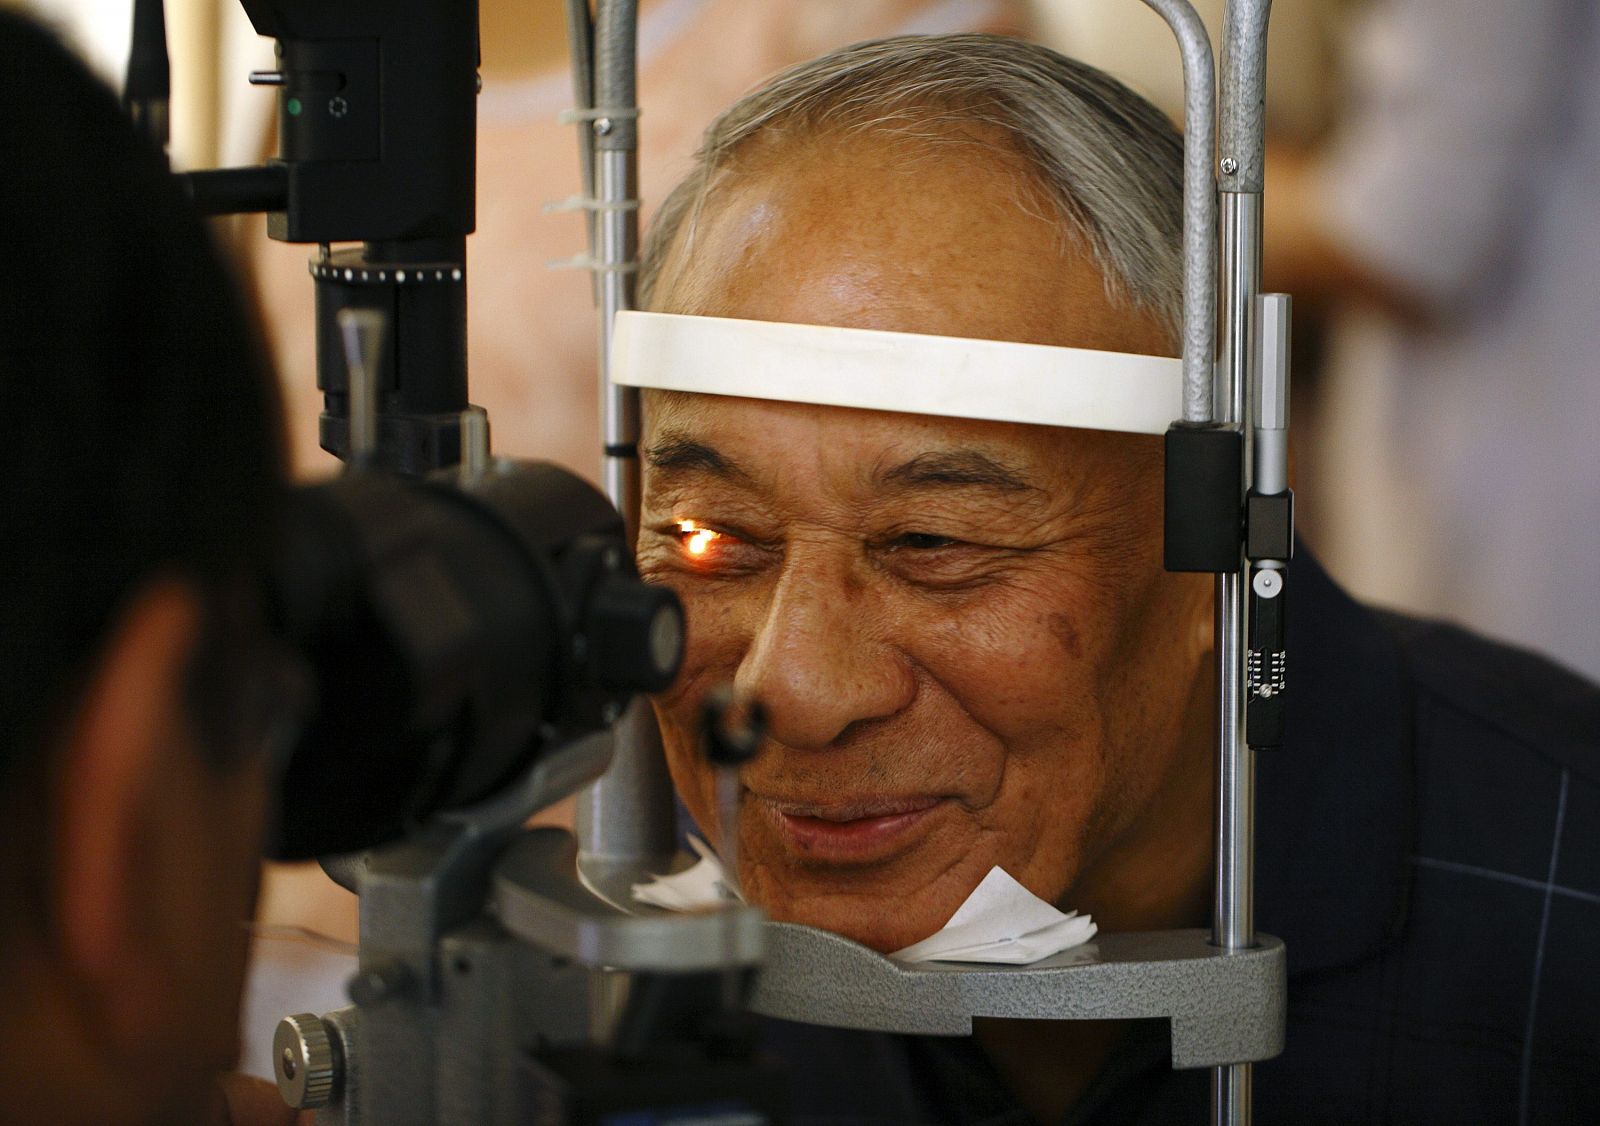 A man smiles as he receives his routine eye check-up after removing his cataracts in Kathmandu